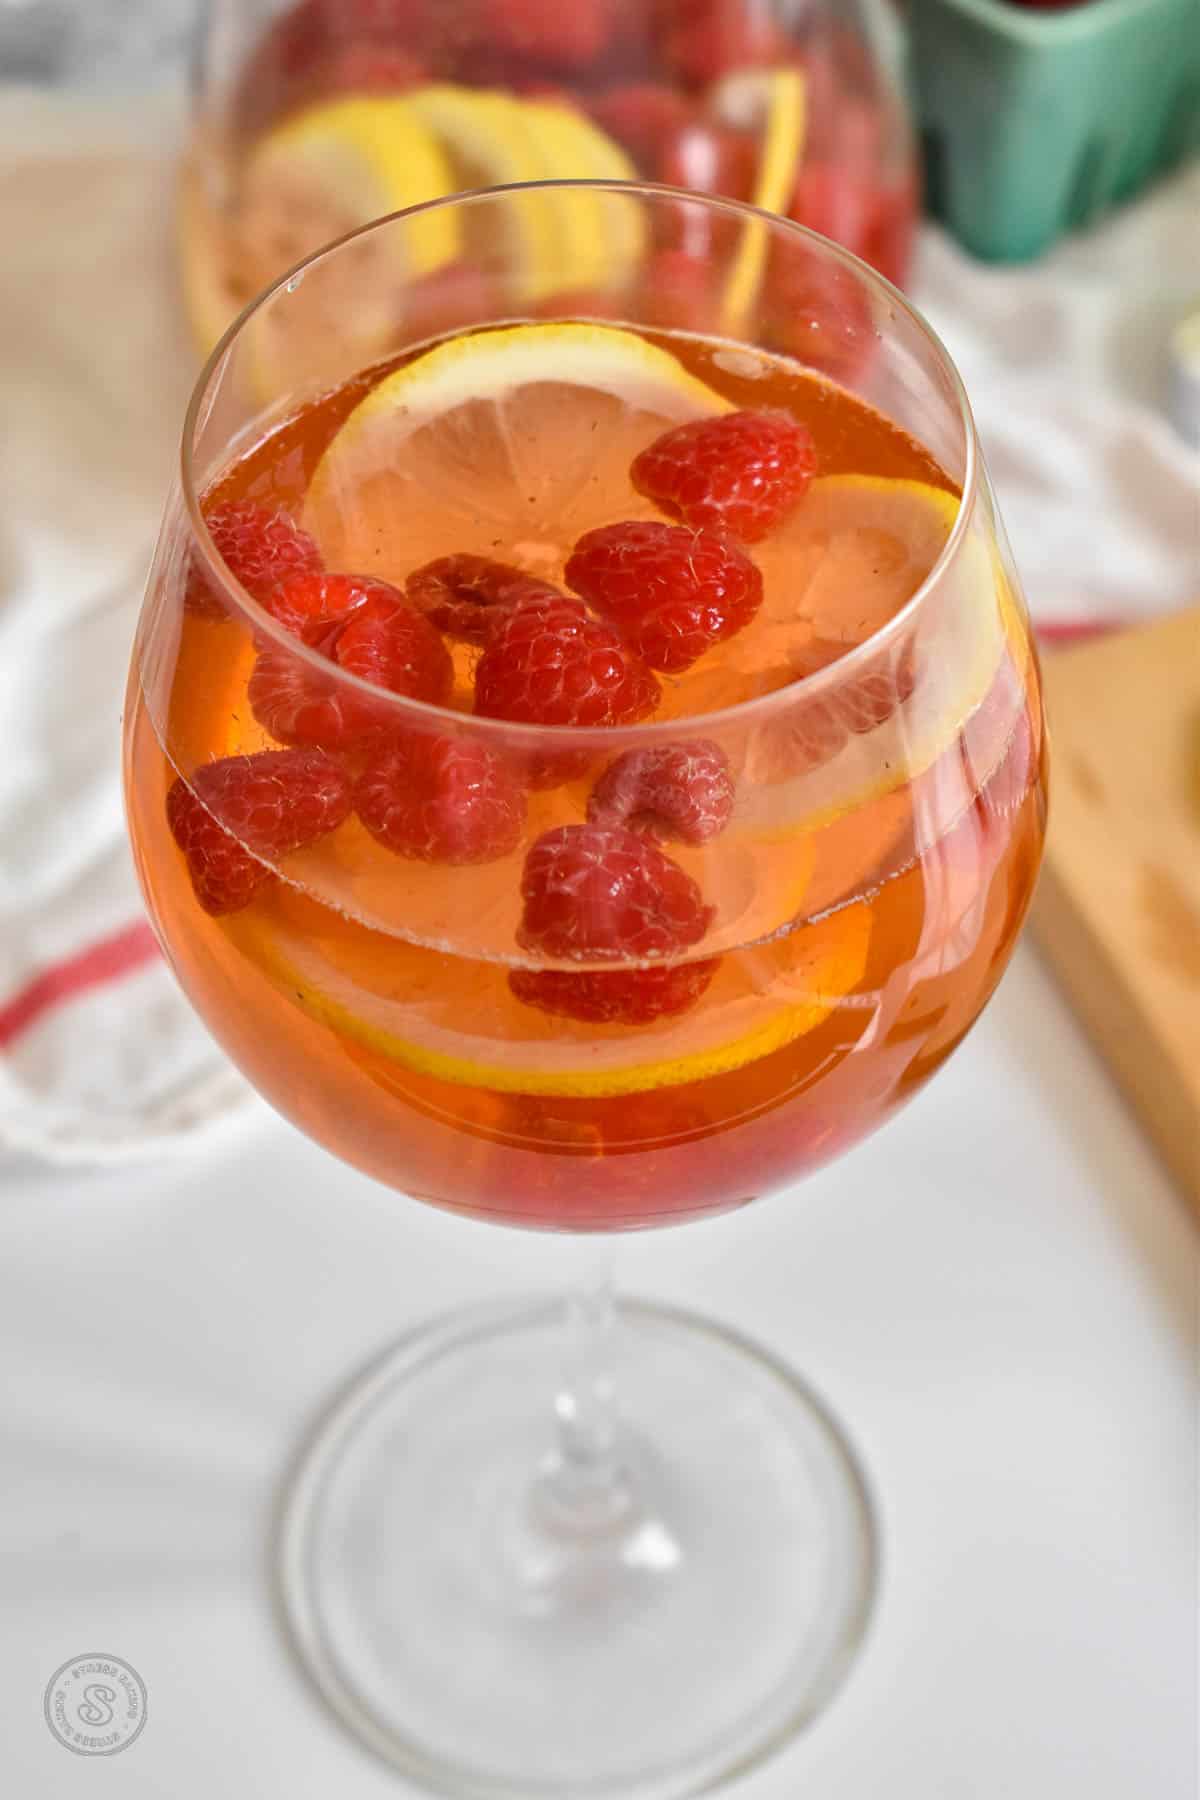 A globe wine glass filled with sliced lemons, raspberries and pink rose wine